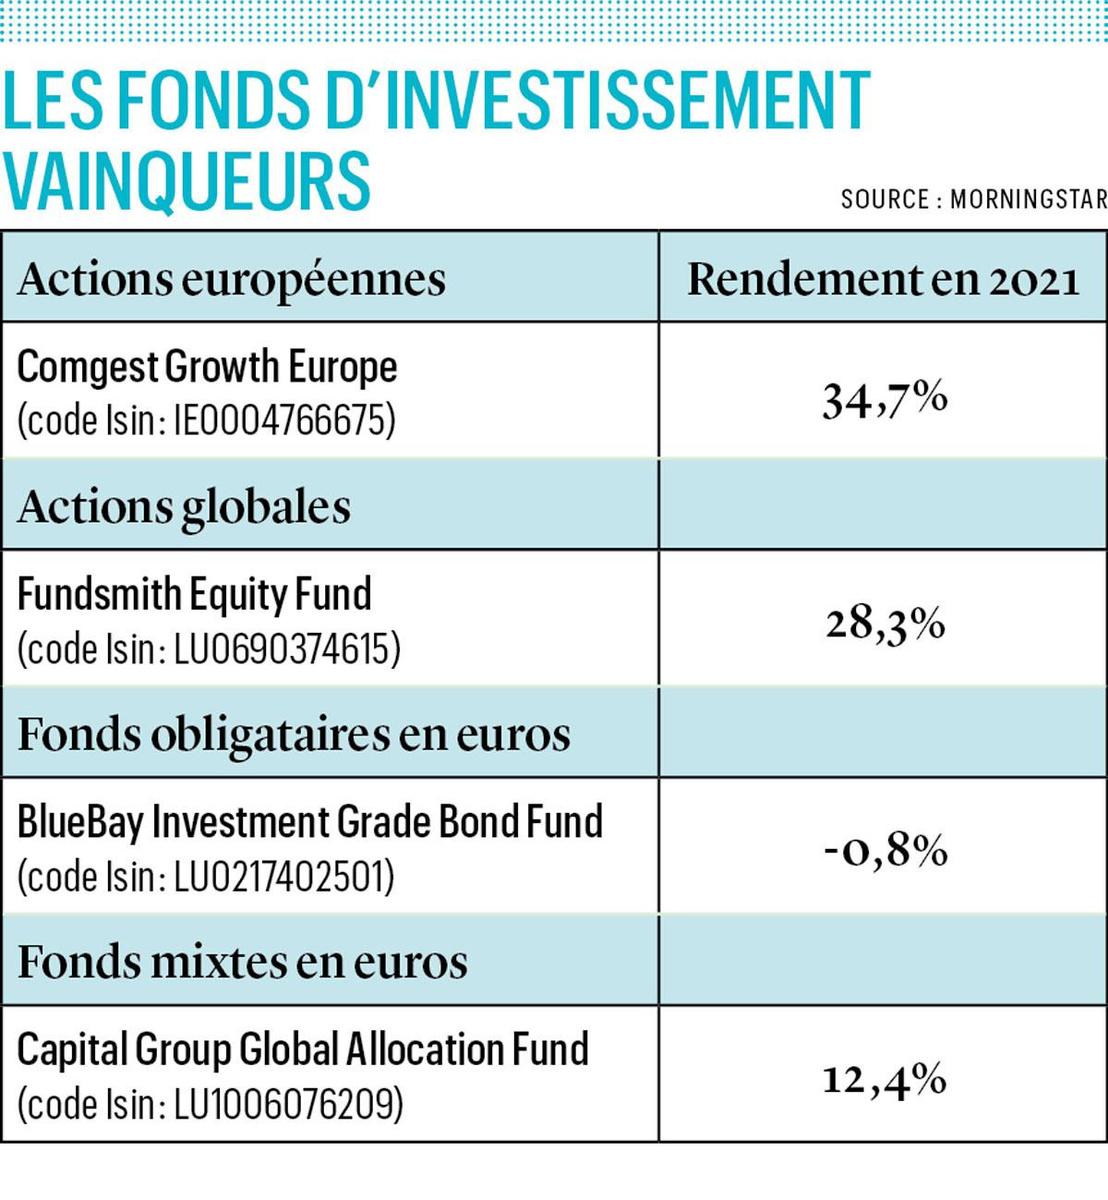 Morningstar Awards for Investing Excellence: ces fonds seront les plus performants